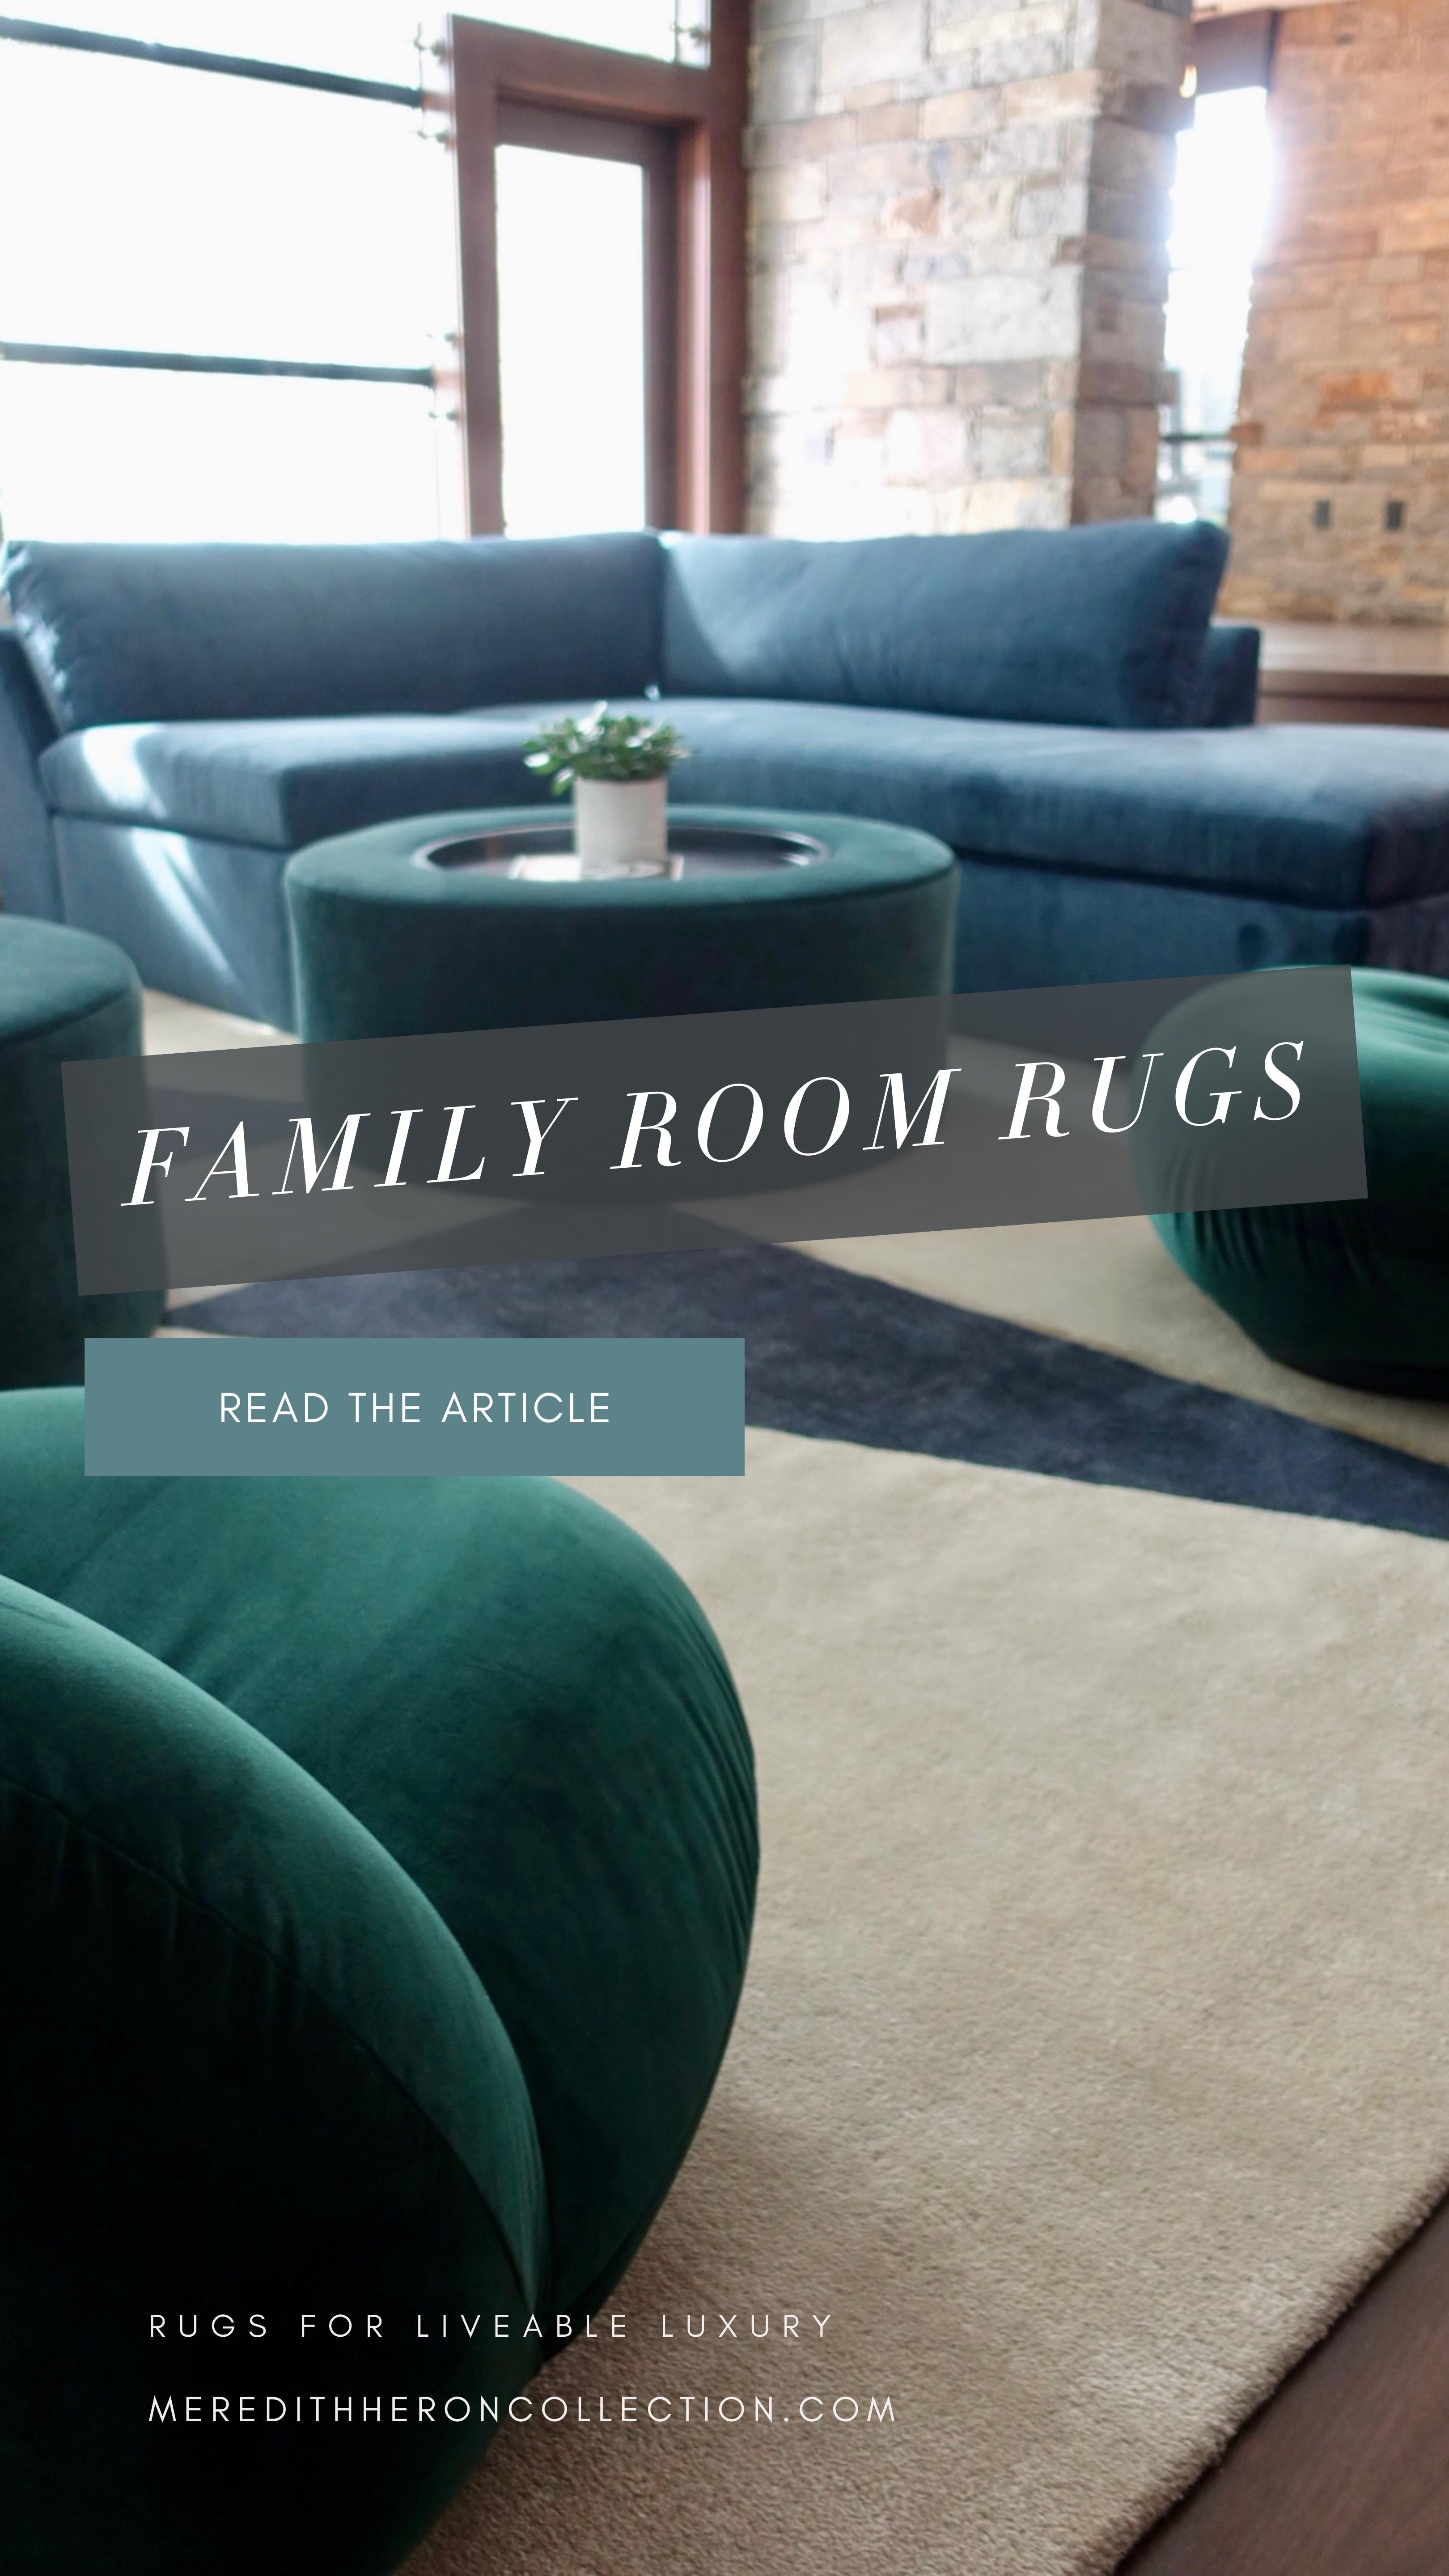 Family Rug Rugs from Meredith Heron Collection